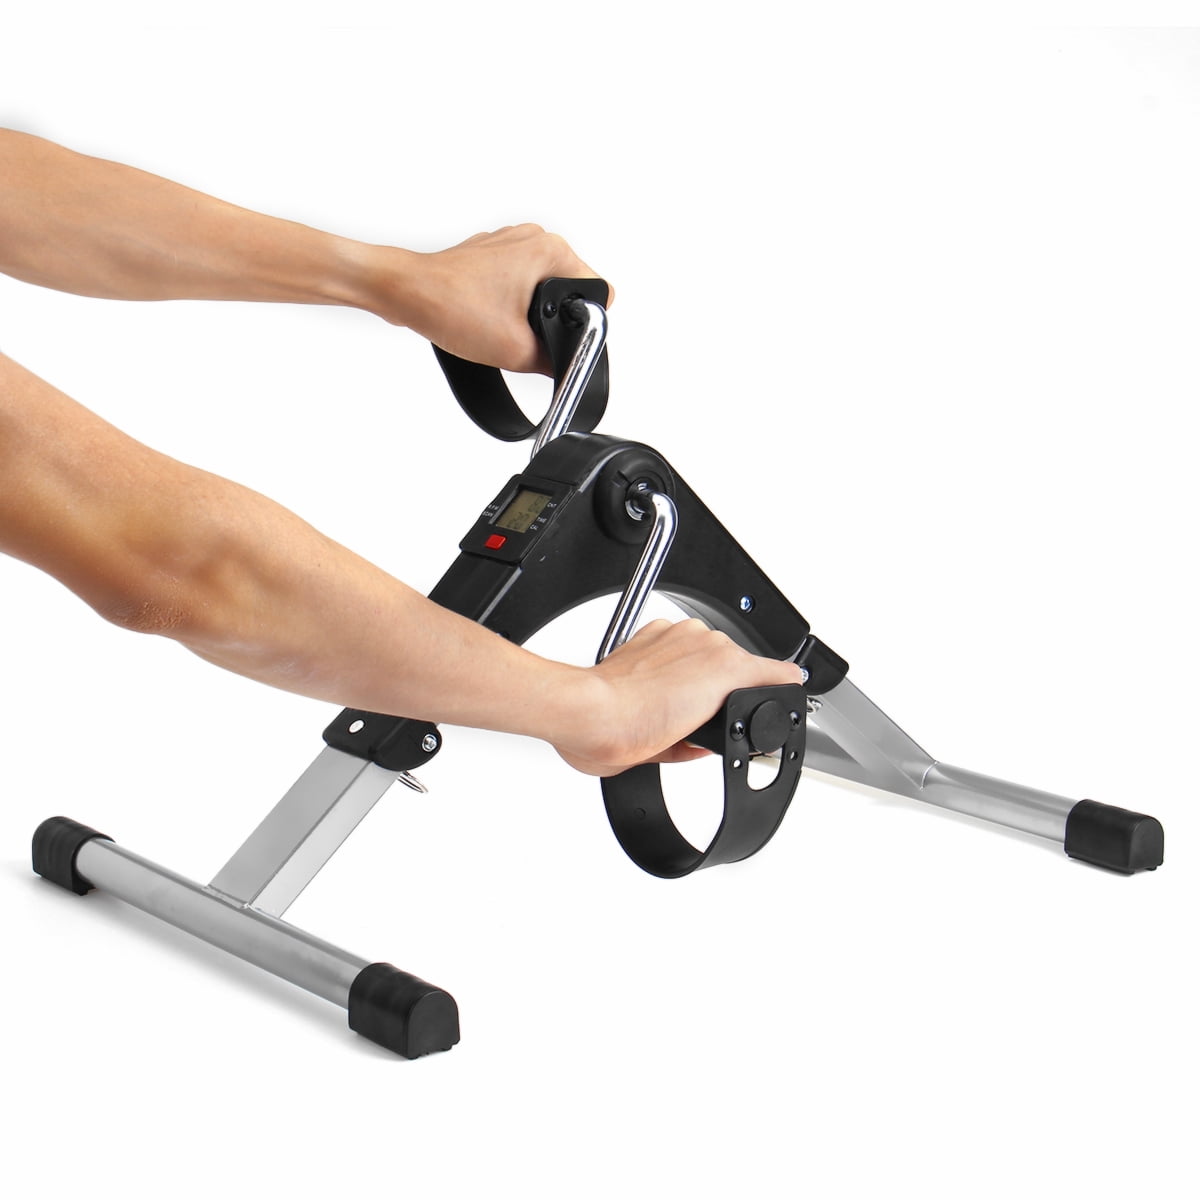 Folding Fitness Pedal Exerciser Stationary with Calorie Counter Under